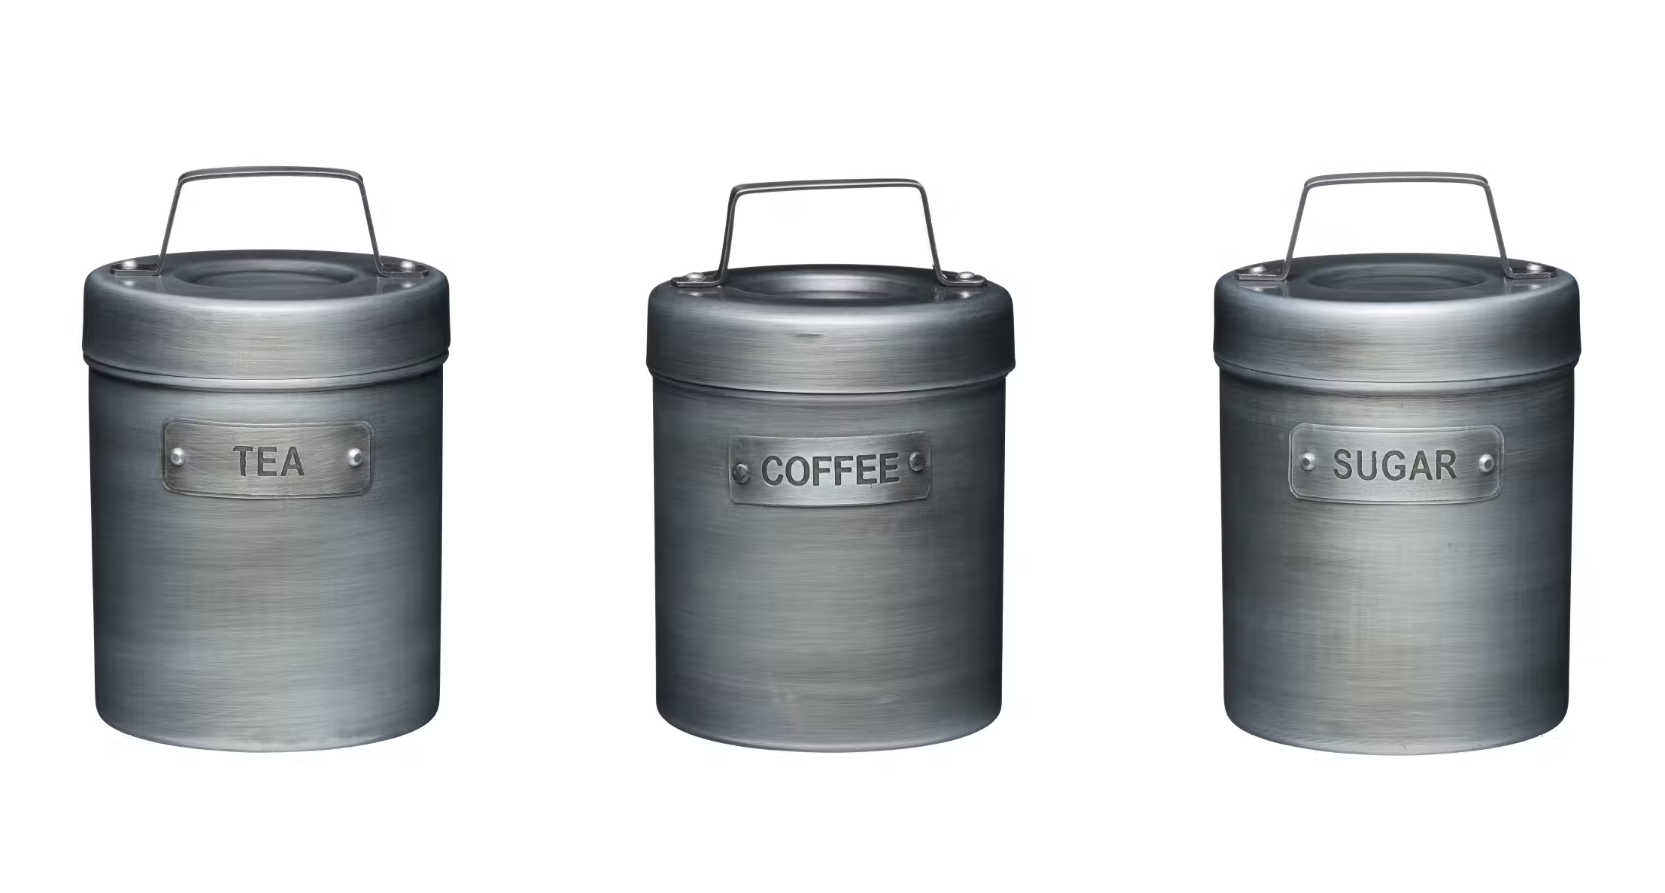 KitchenCraft Industrial Kitchen Tea, Coffee, Sugar Canisters Set of 3